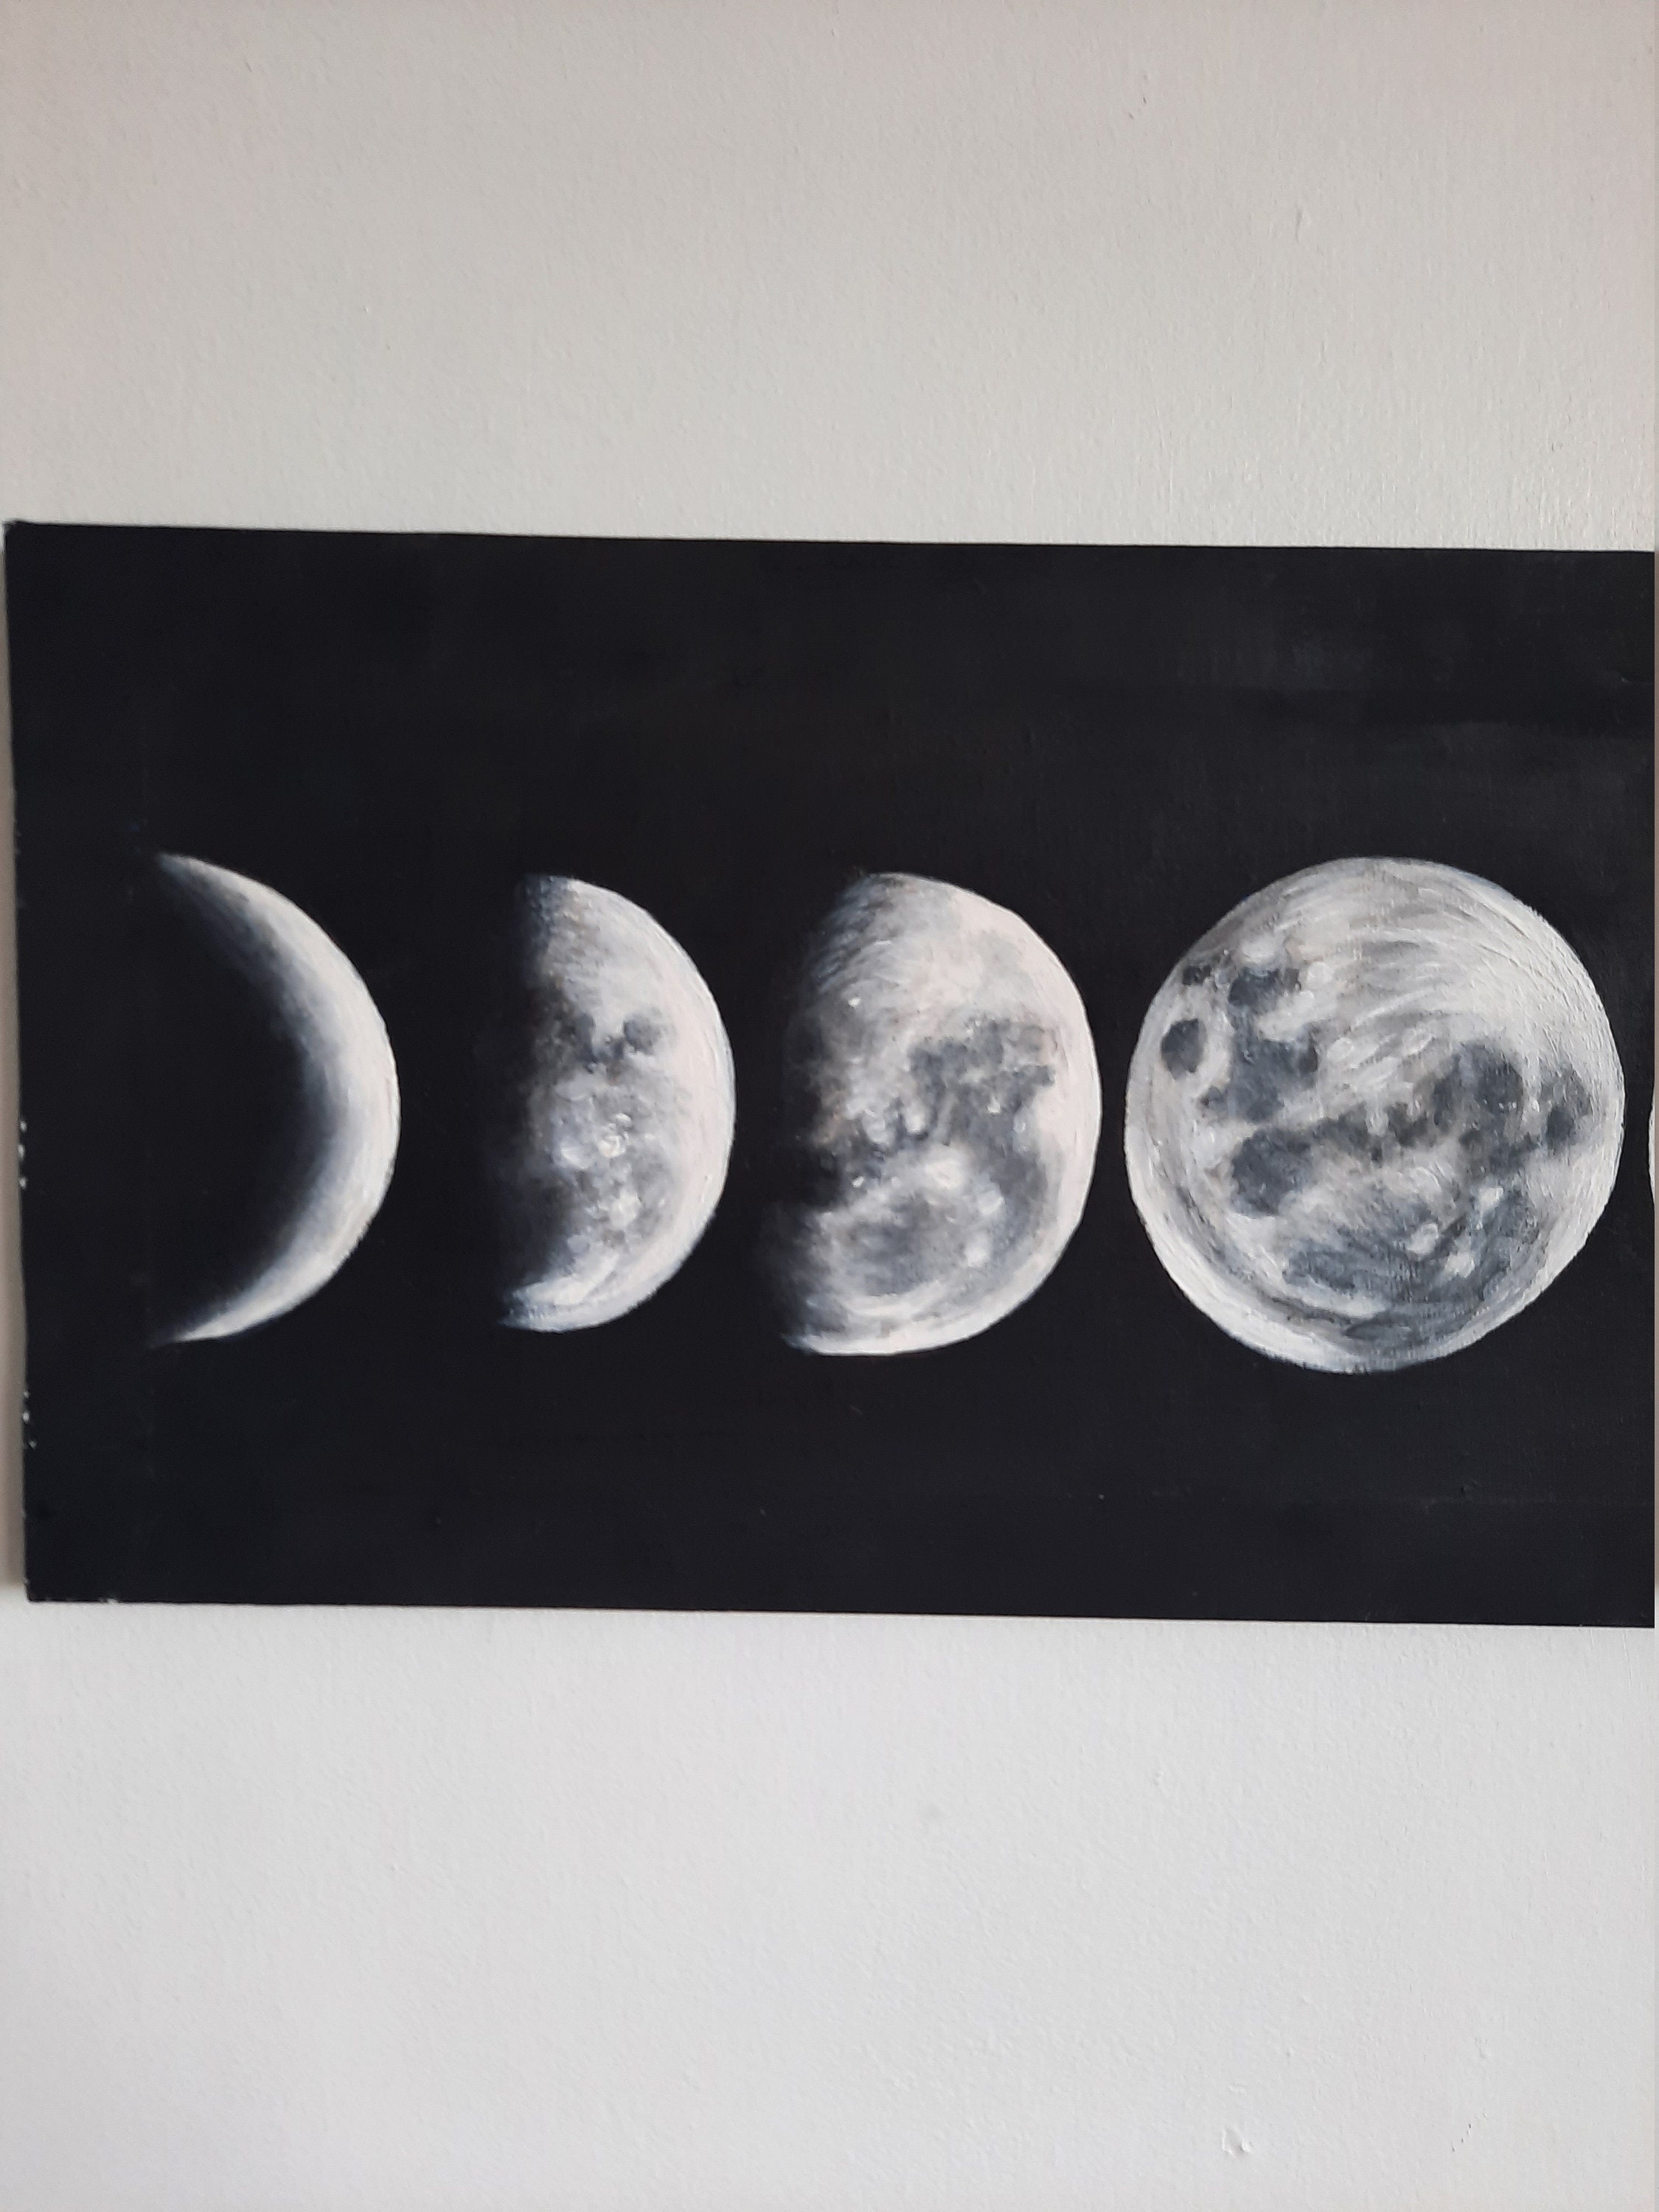 Orginal acrylic painting on canvas “full moon” black and white 16x20 inches